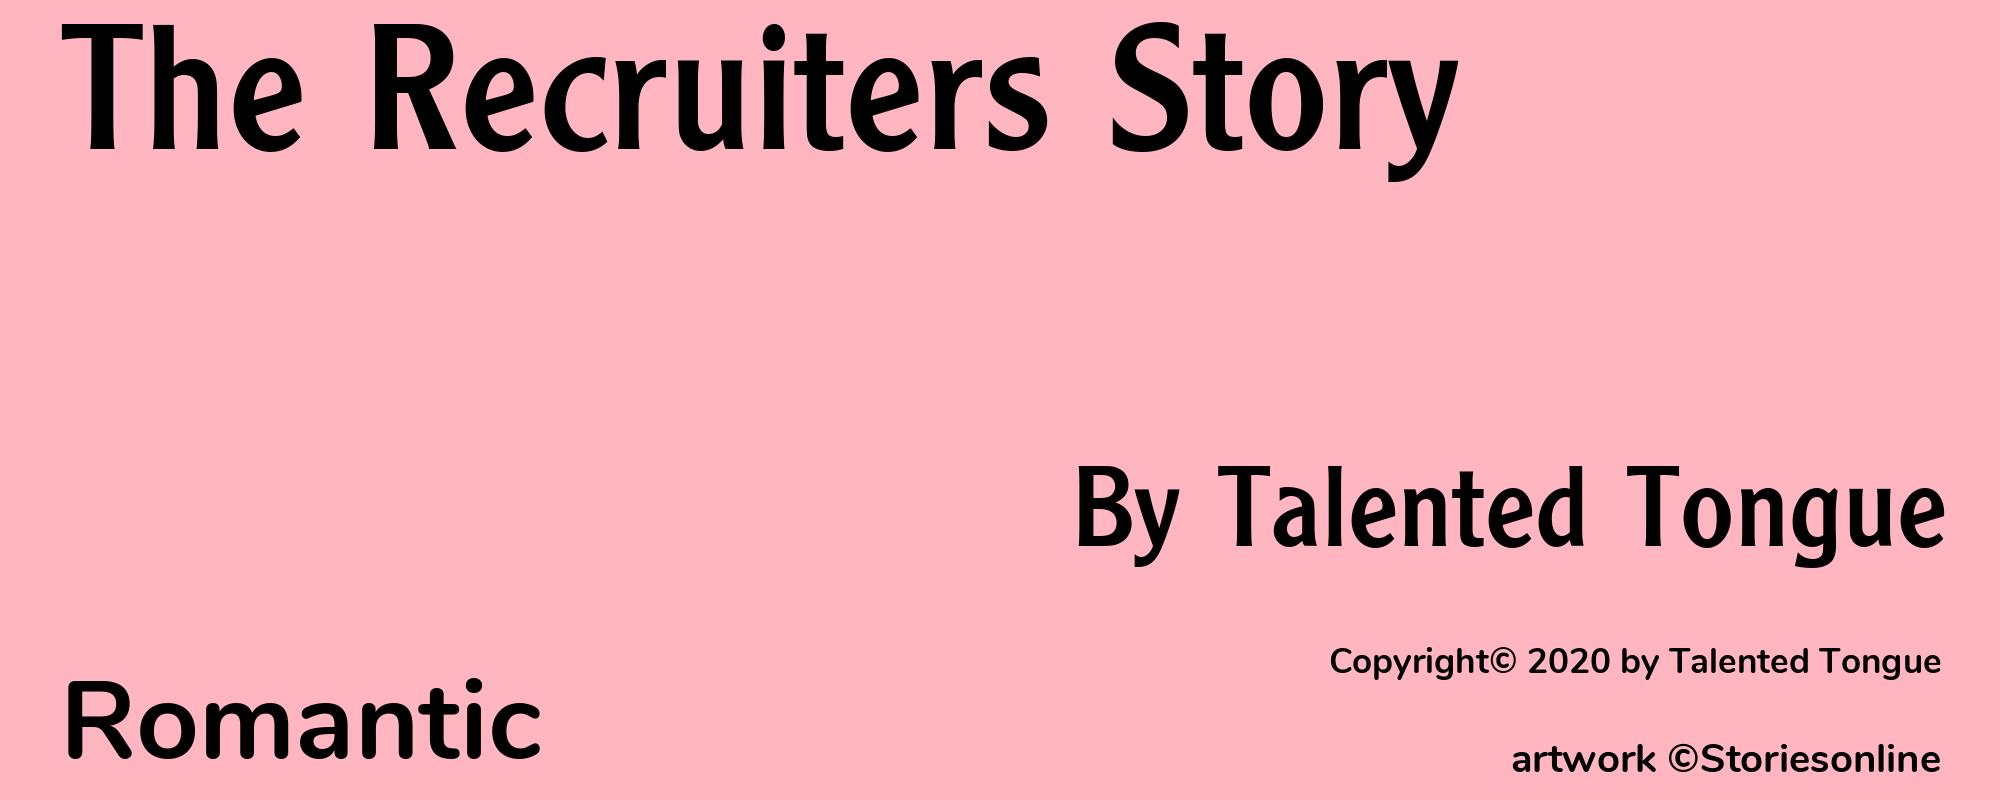 The Recruiters Story - Cover